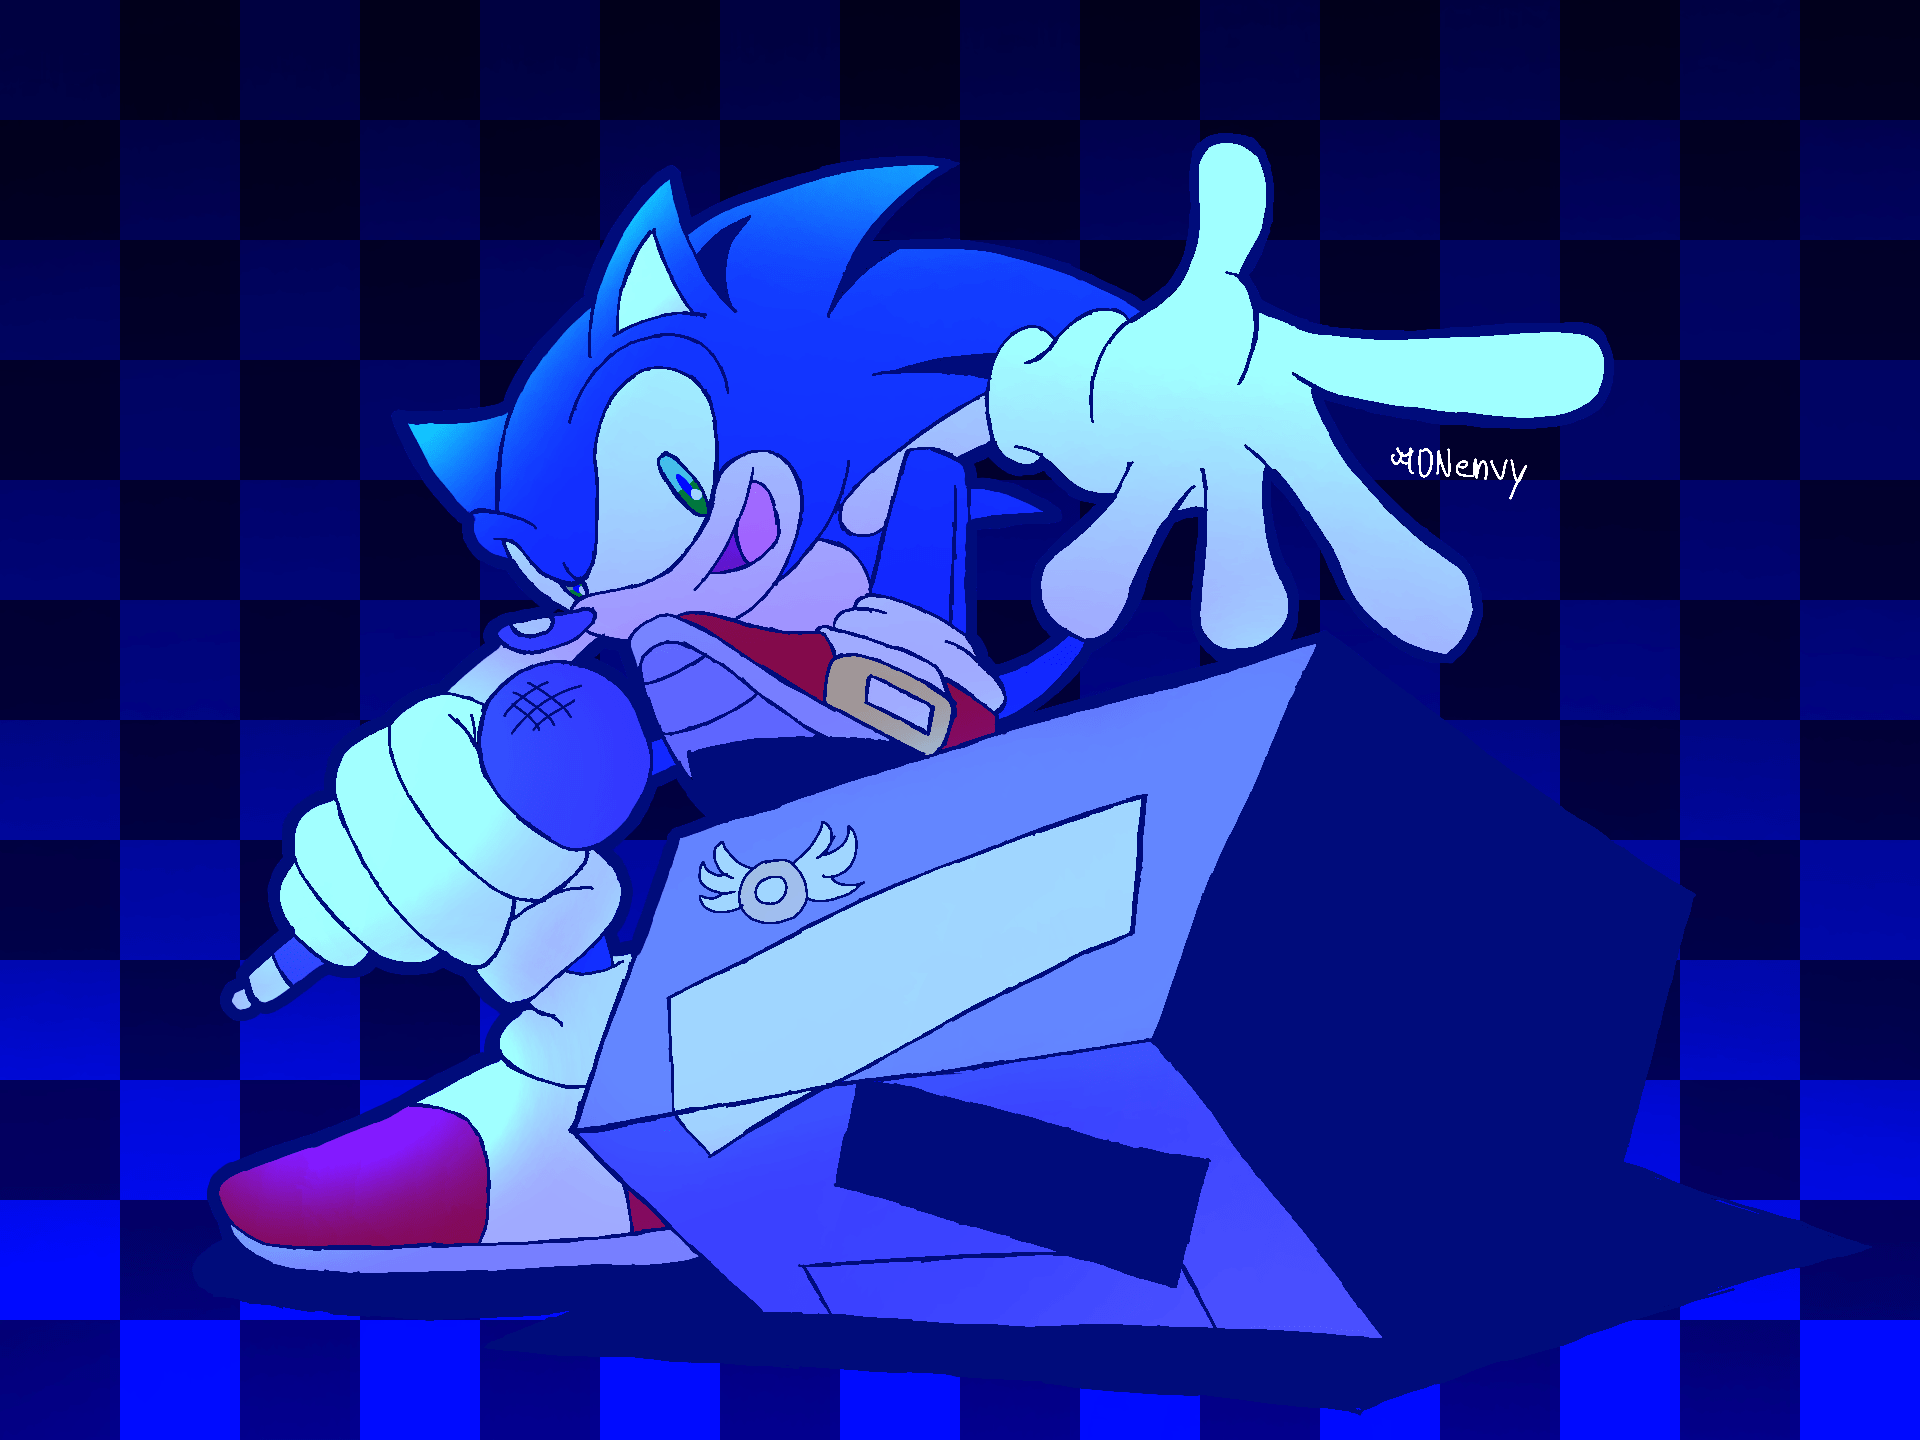 Sonic the hedgehog in a blue suit with his hand on top of it - Sonic